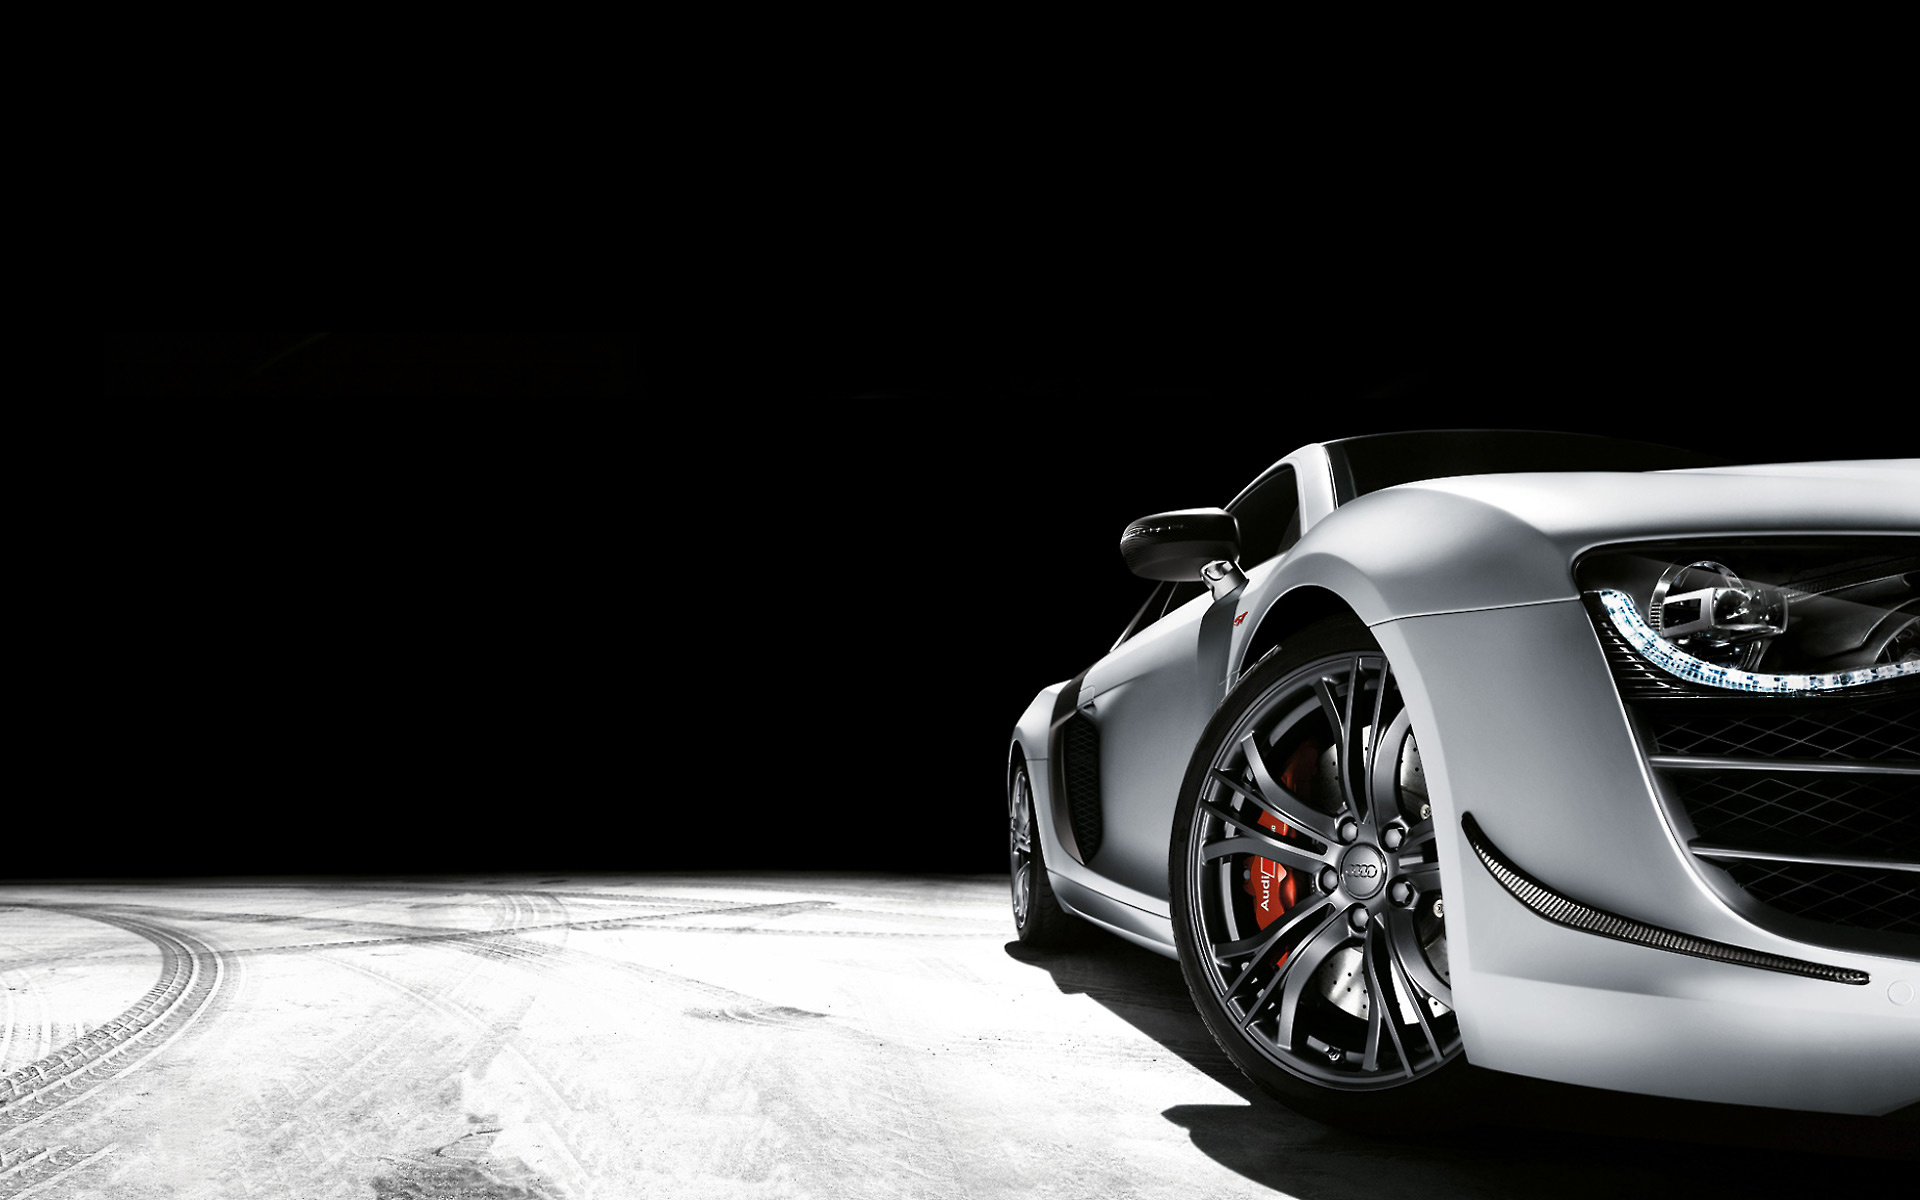 Sports Car: Low-profile tires with high-performance rubber, Enhanced grip and traction. 1920x1200 HD Wallpaper.